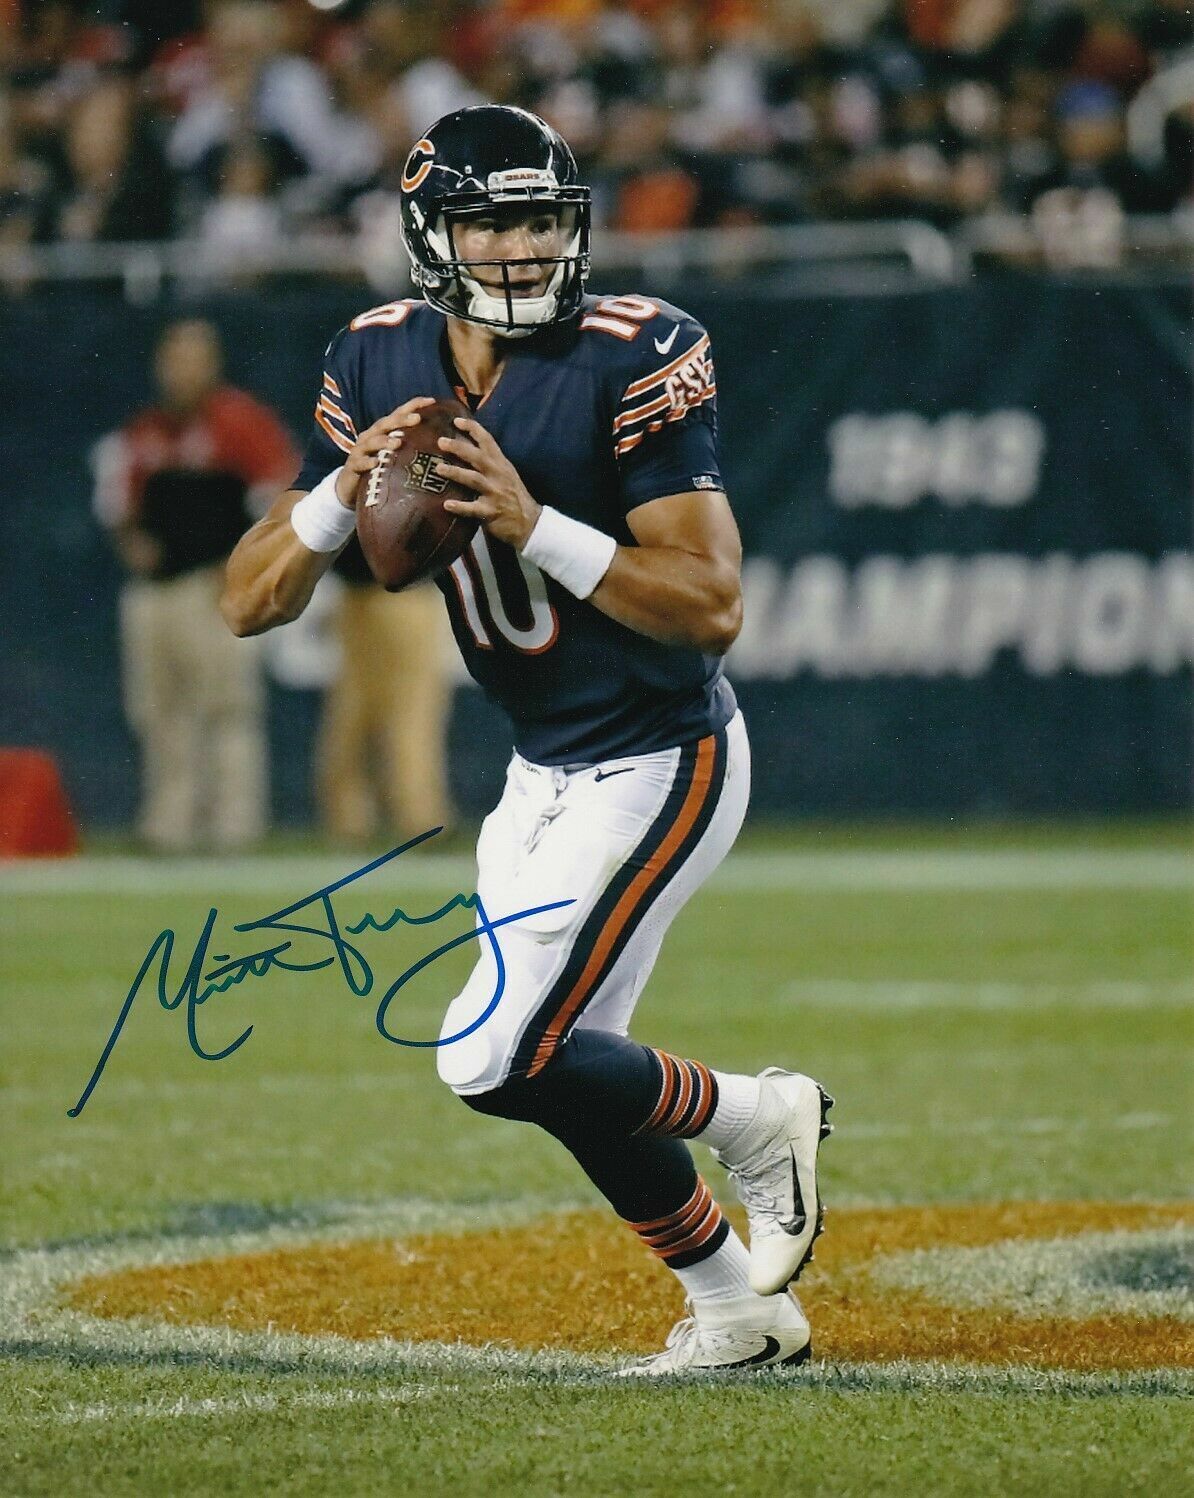 Mitchell Trubisky Autographed Signed 8x10 Photo Poster painting ( Bears ) REPRINT ,